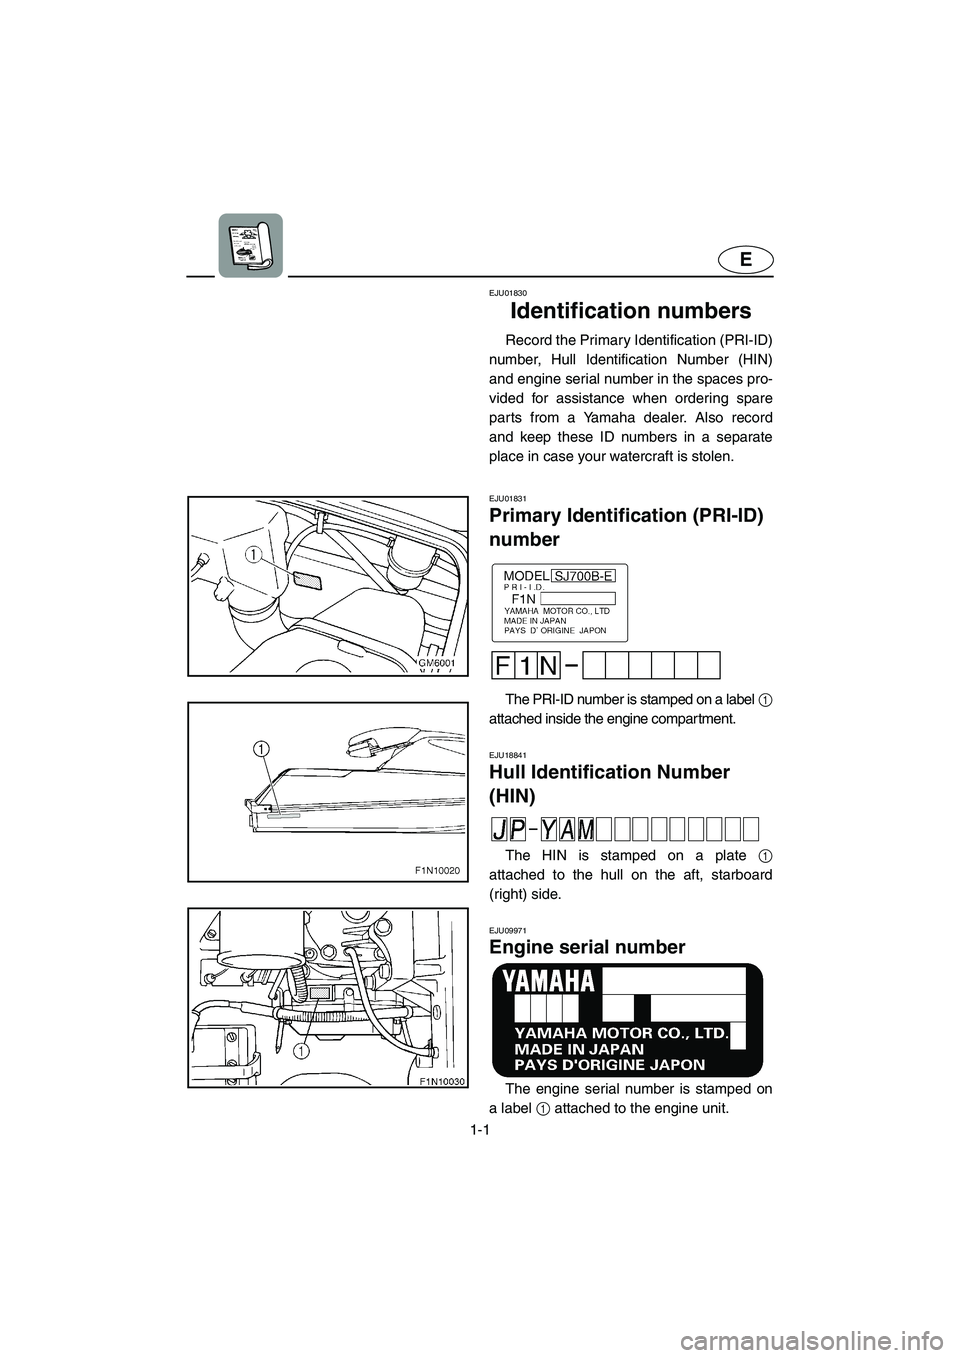 YAMAHA SUPERJET 2006  Owners Manual 1-1
E
EJU01830
Identification numbers 
Record the Primary Identification (PRI-ID)
number, Hull Identification Number (HIN)
and engine serial number in the spaces pro-
vided for assistance when orderin